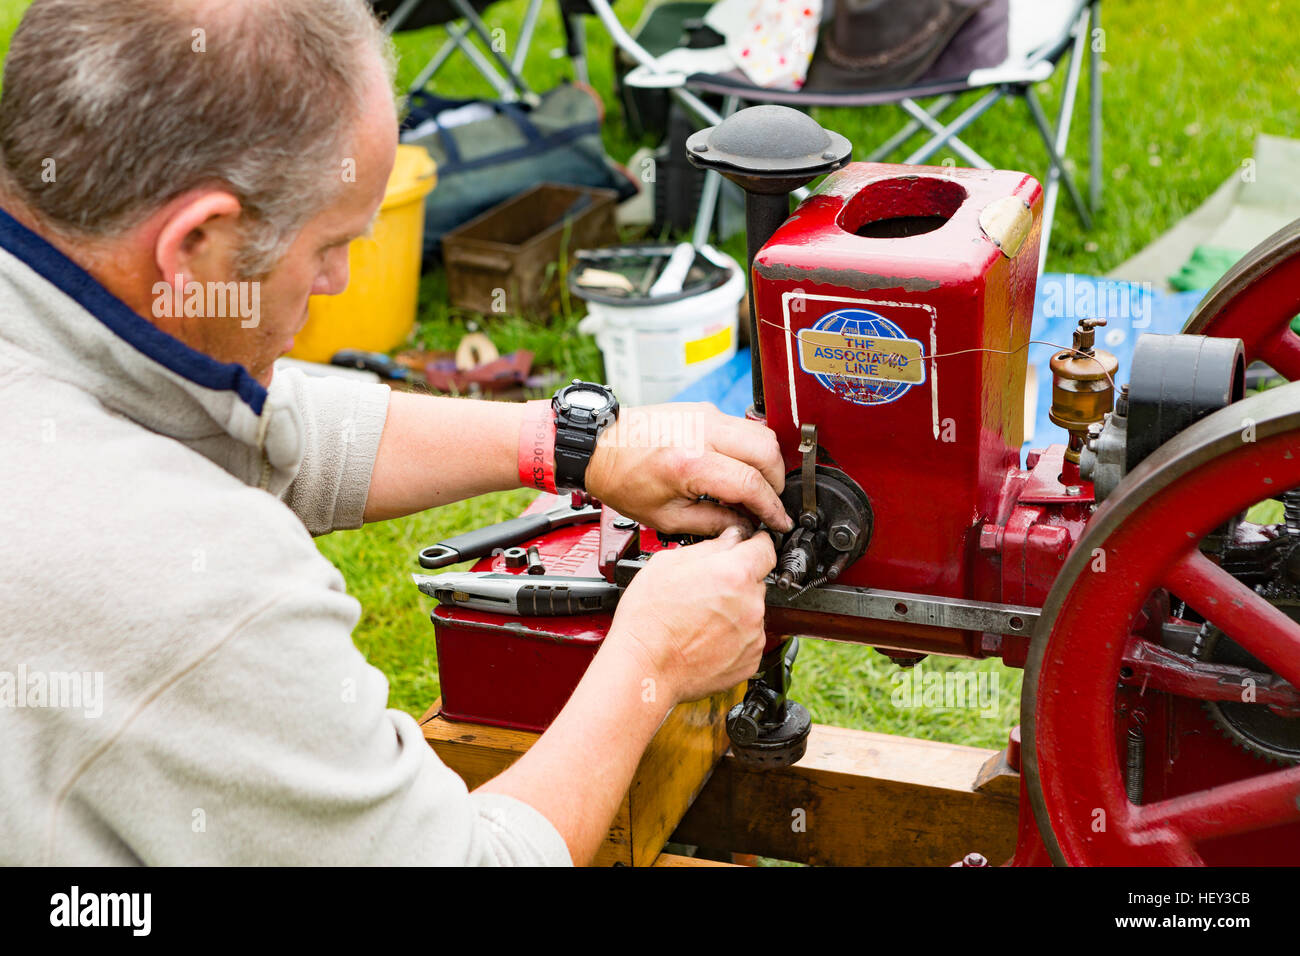 A man adjusts a Stationary Engine at a county show. Stock Photo